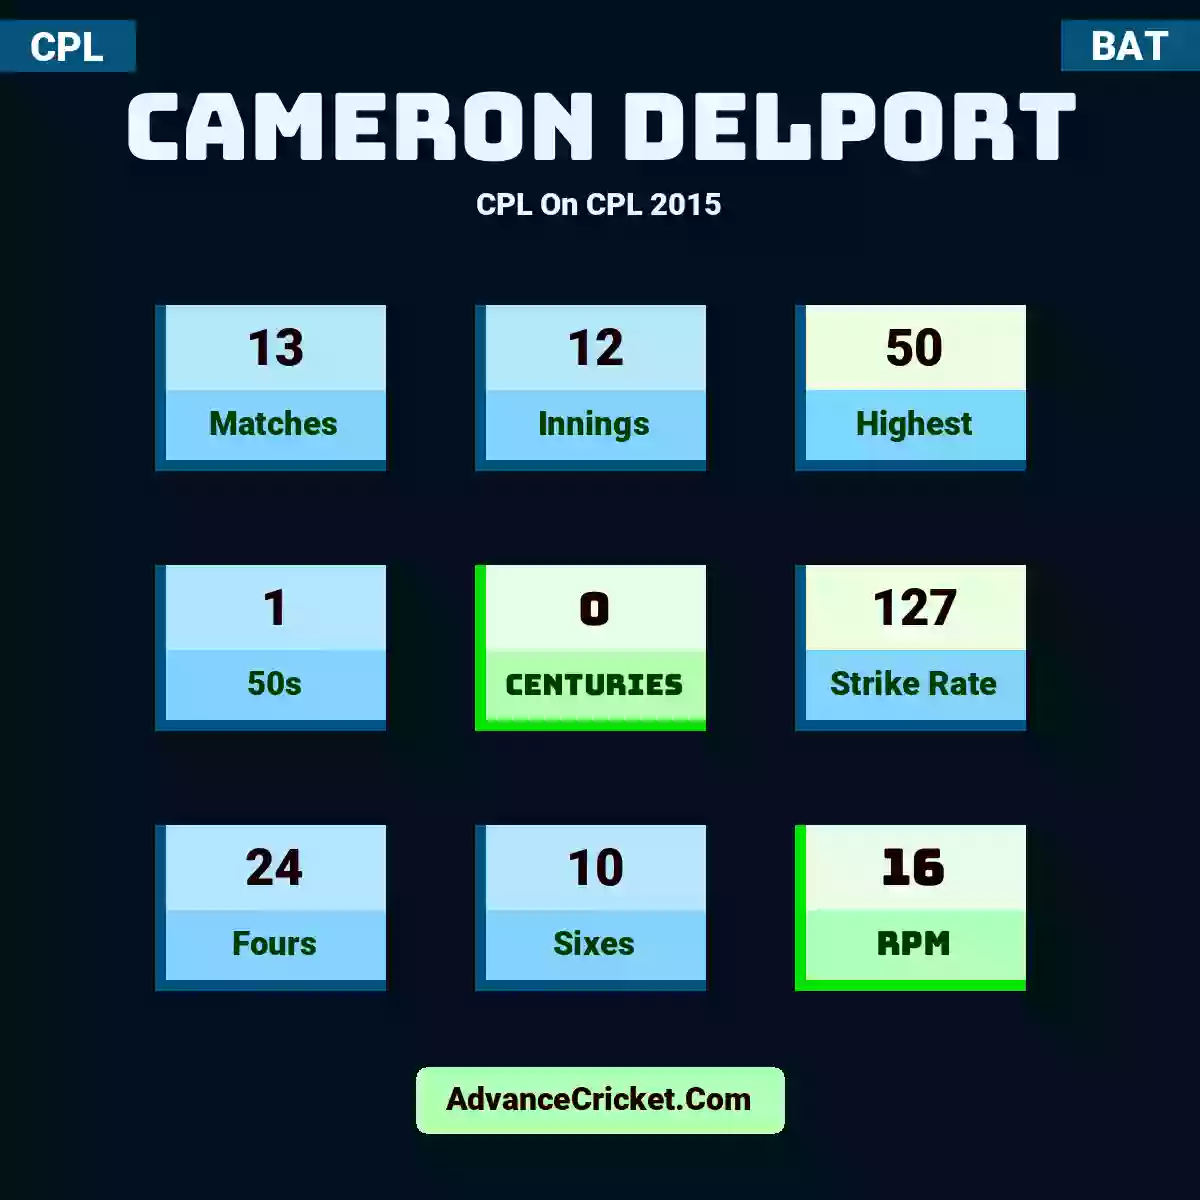 Cameron Delport CPL  On CPL 2015, Cameron Delport played 13 matches, scored 50 runs as highest, 1 half-centuries, and 0 centuries, with a strike rate of 127. C.Delport hit 24 fours and 10 sixes, with an RPM of 16.